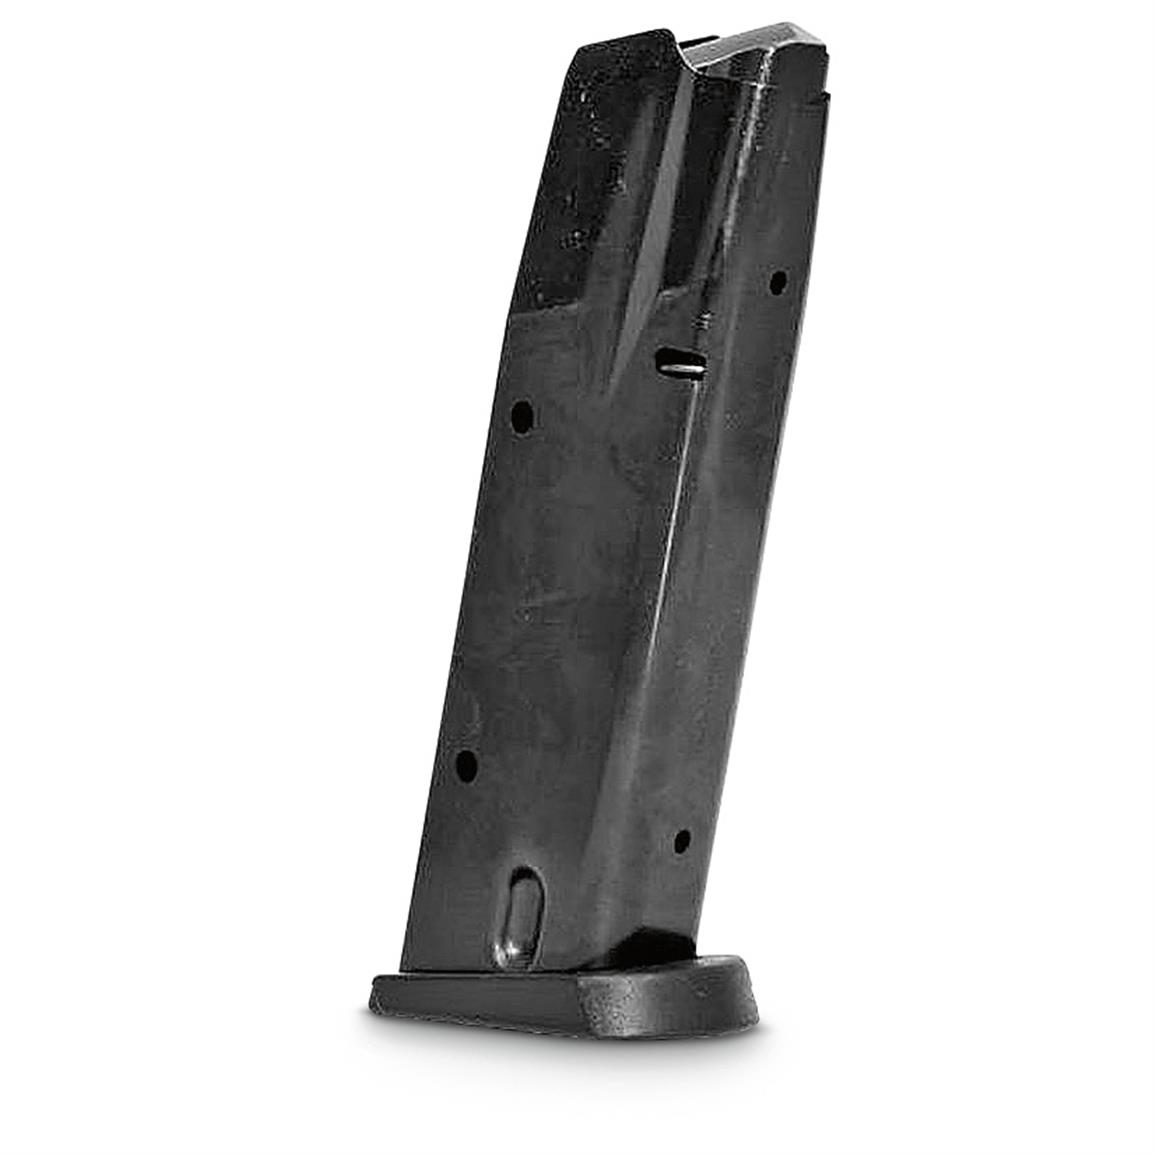 EAA Witness, 10mm Caliber Magazine, Full Size/Large Frame Compact, 14 Rounds